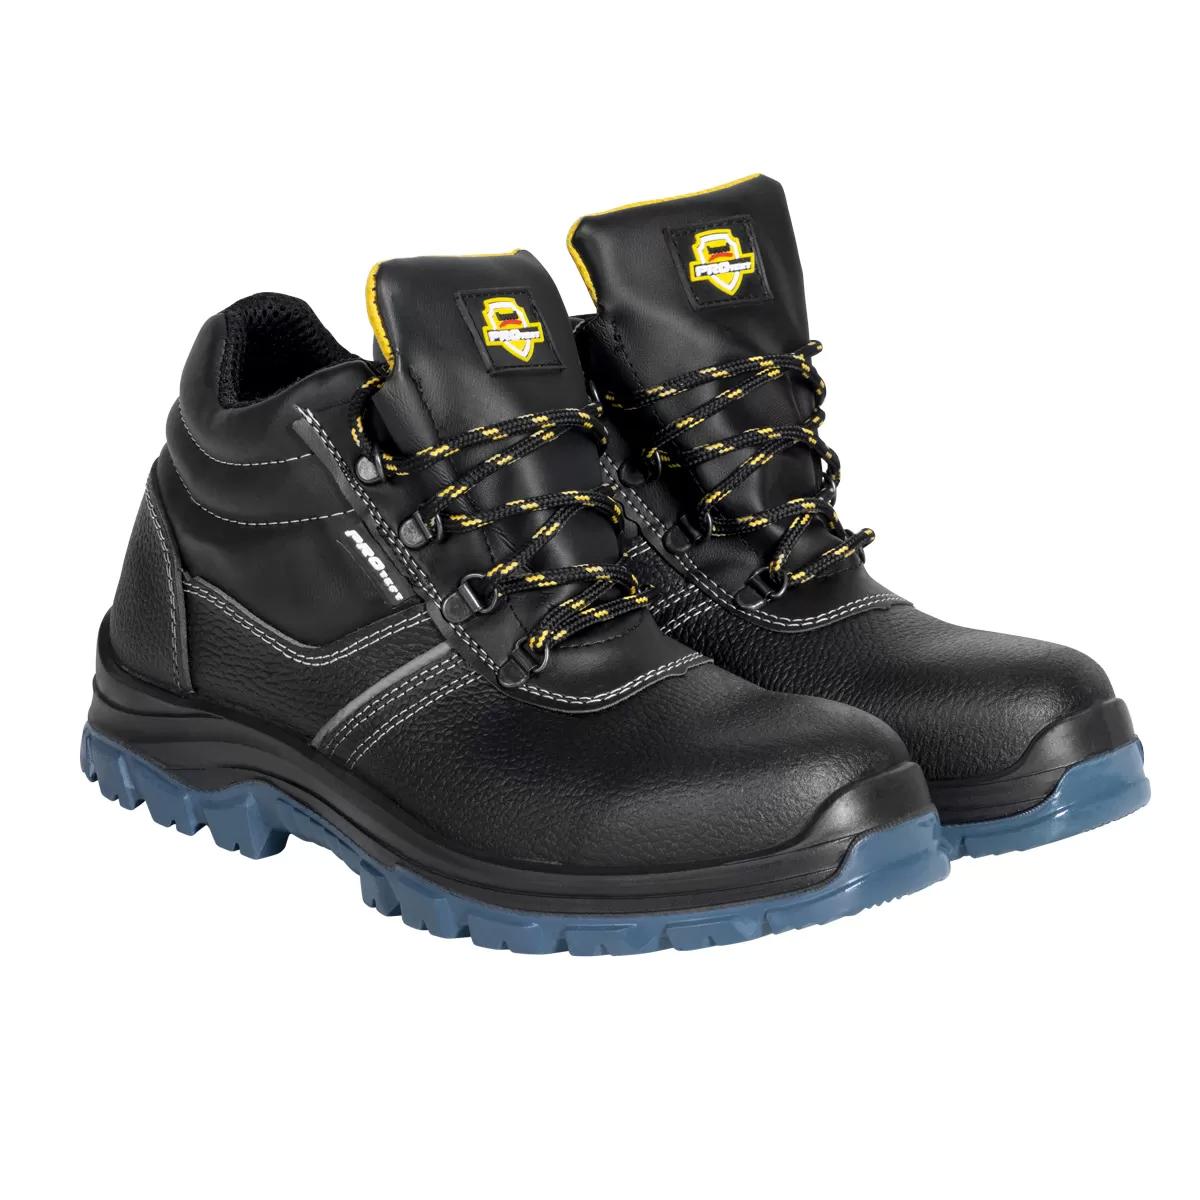 Safety shoes Craft S1P high cut 